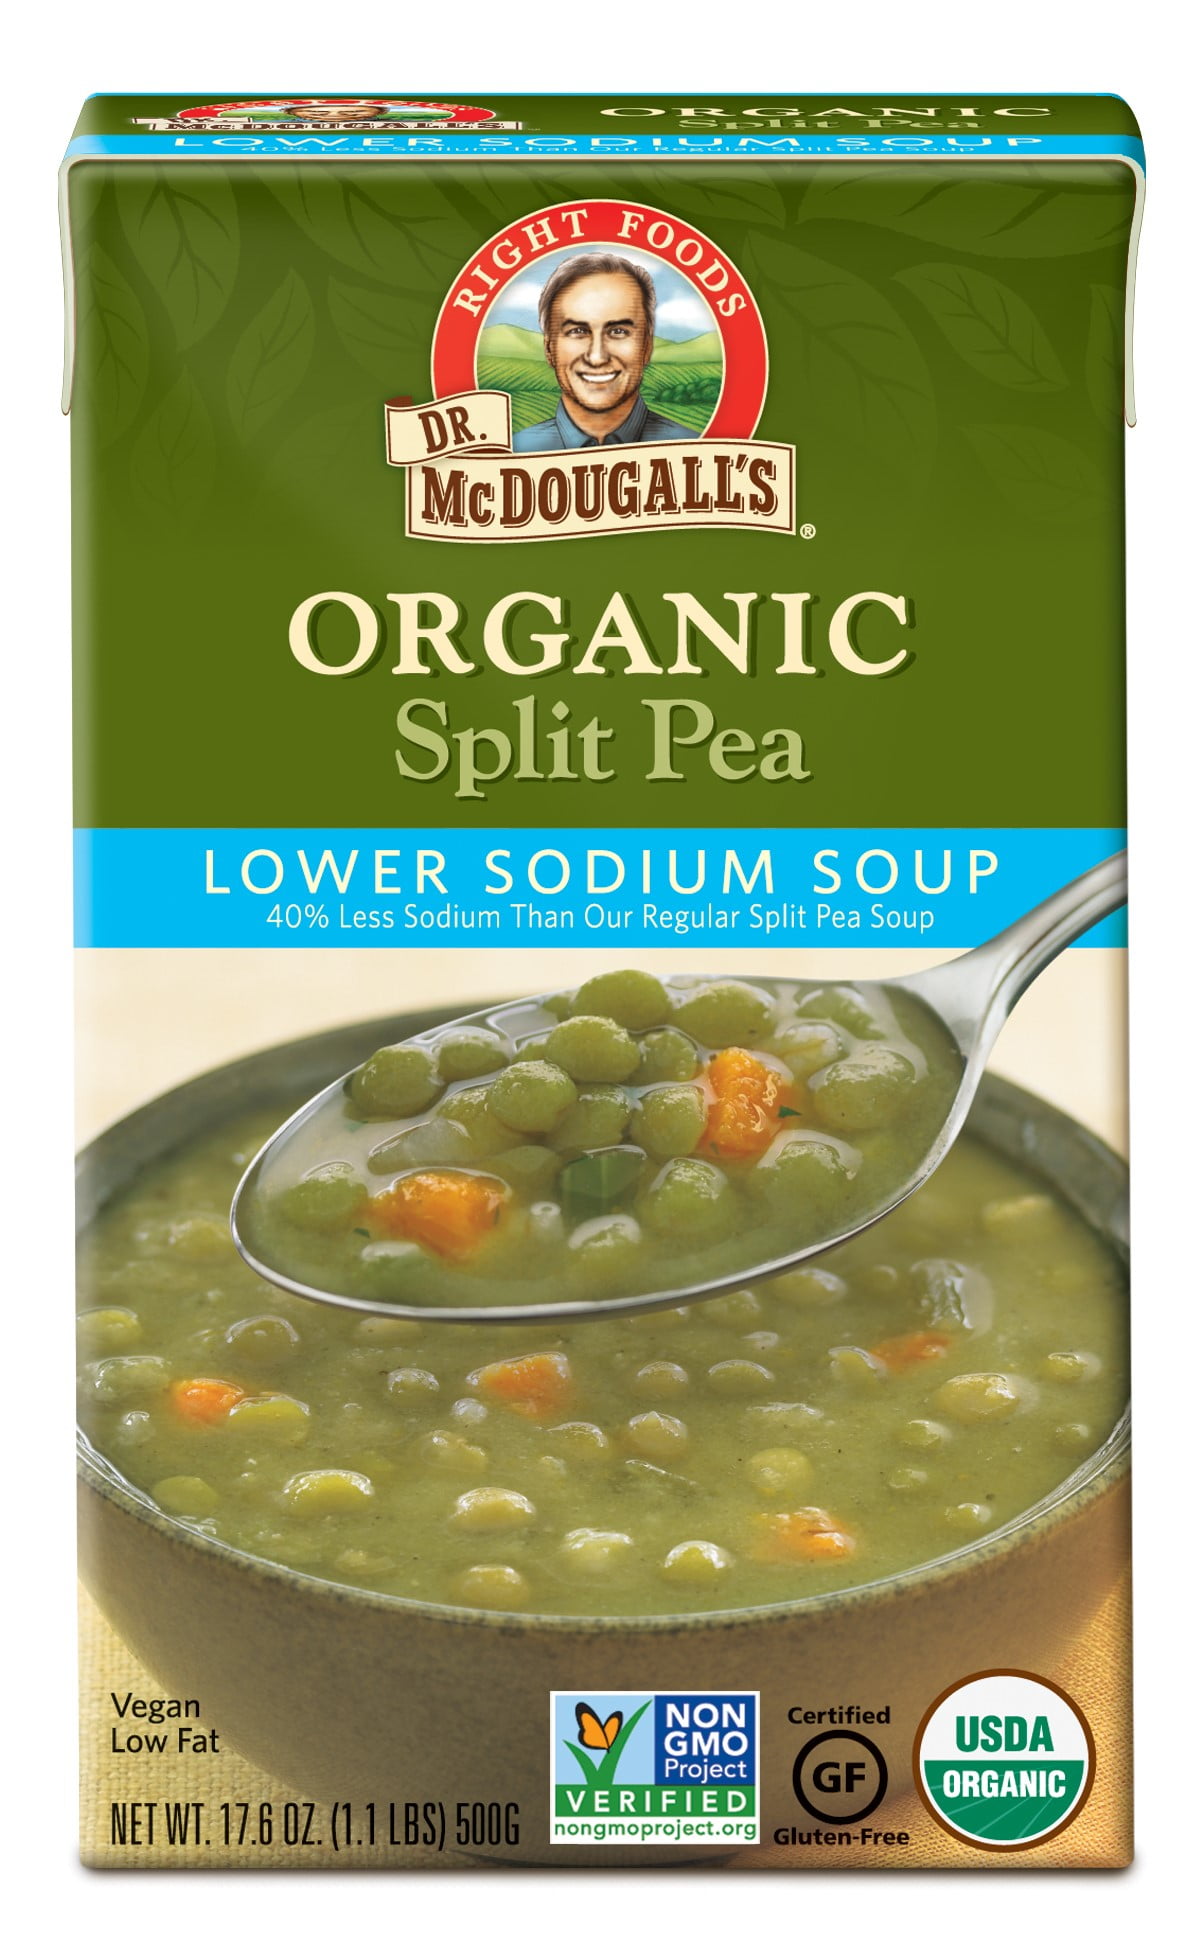 1.5 lbs of VEGAN soup (found at Whole Foods in SoCal.) 250 calories for the  whole container. : r/Volumeeating